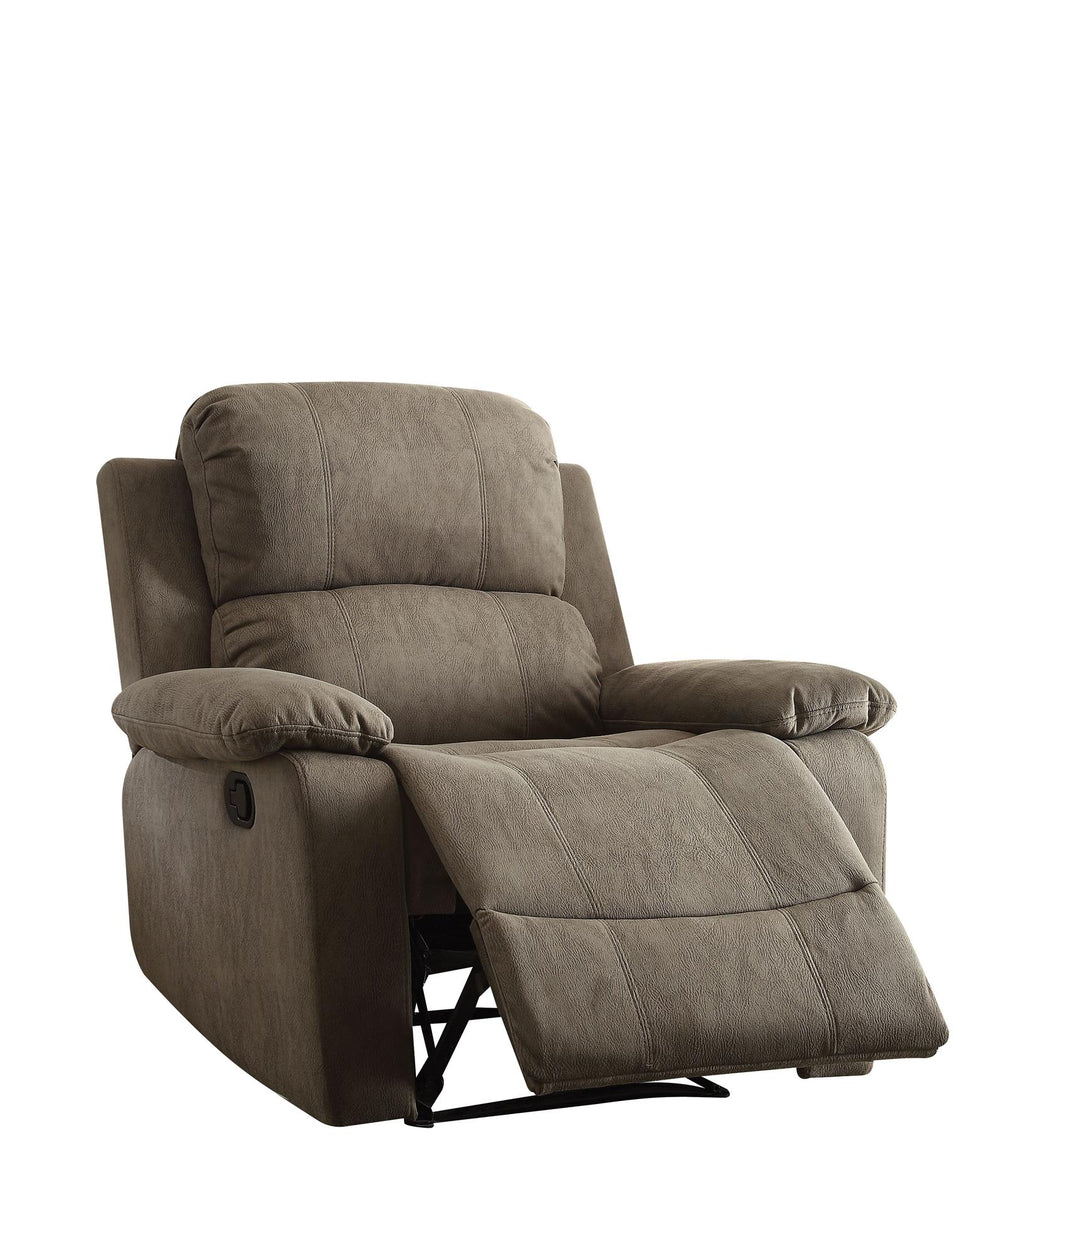 Recliner with Memory Foam Cushion - Gray